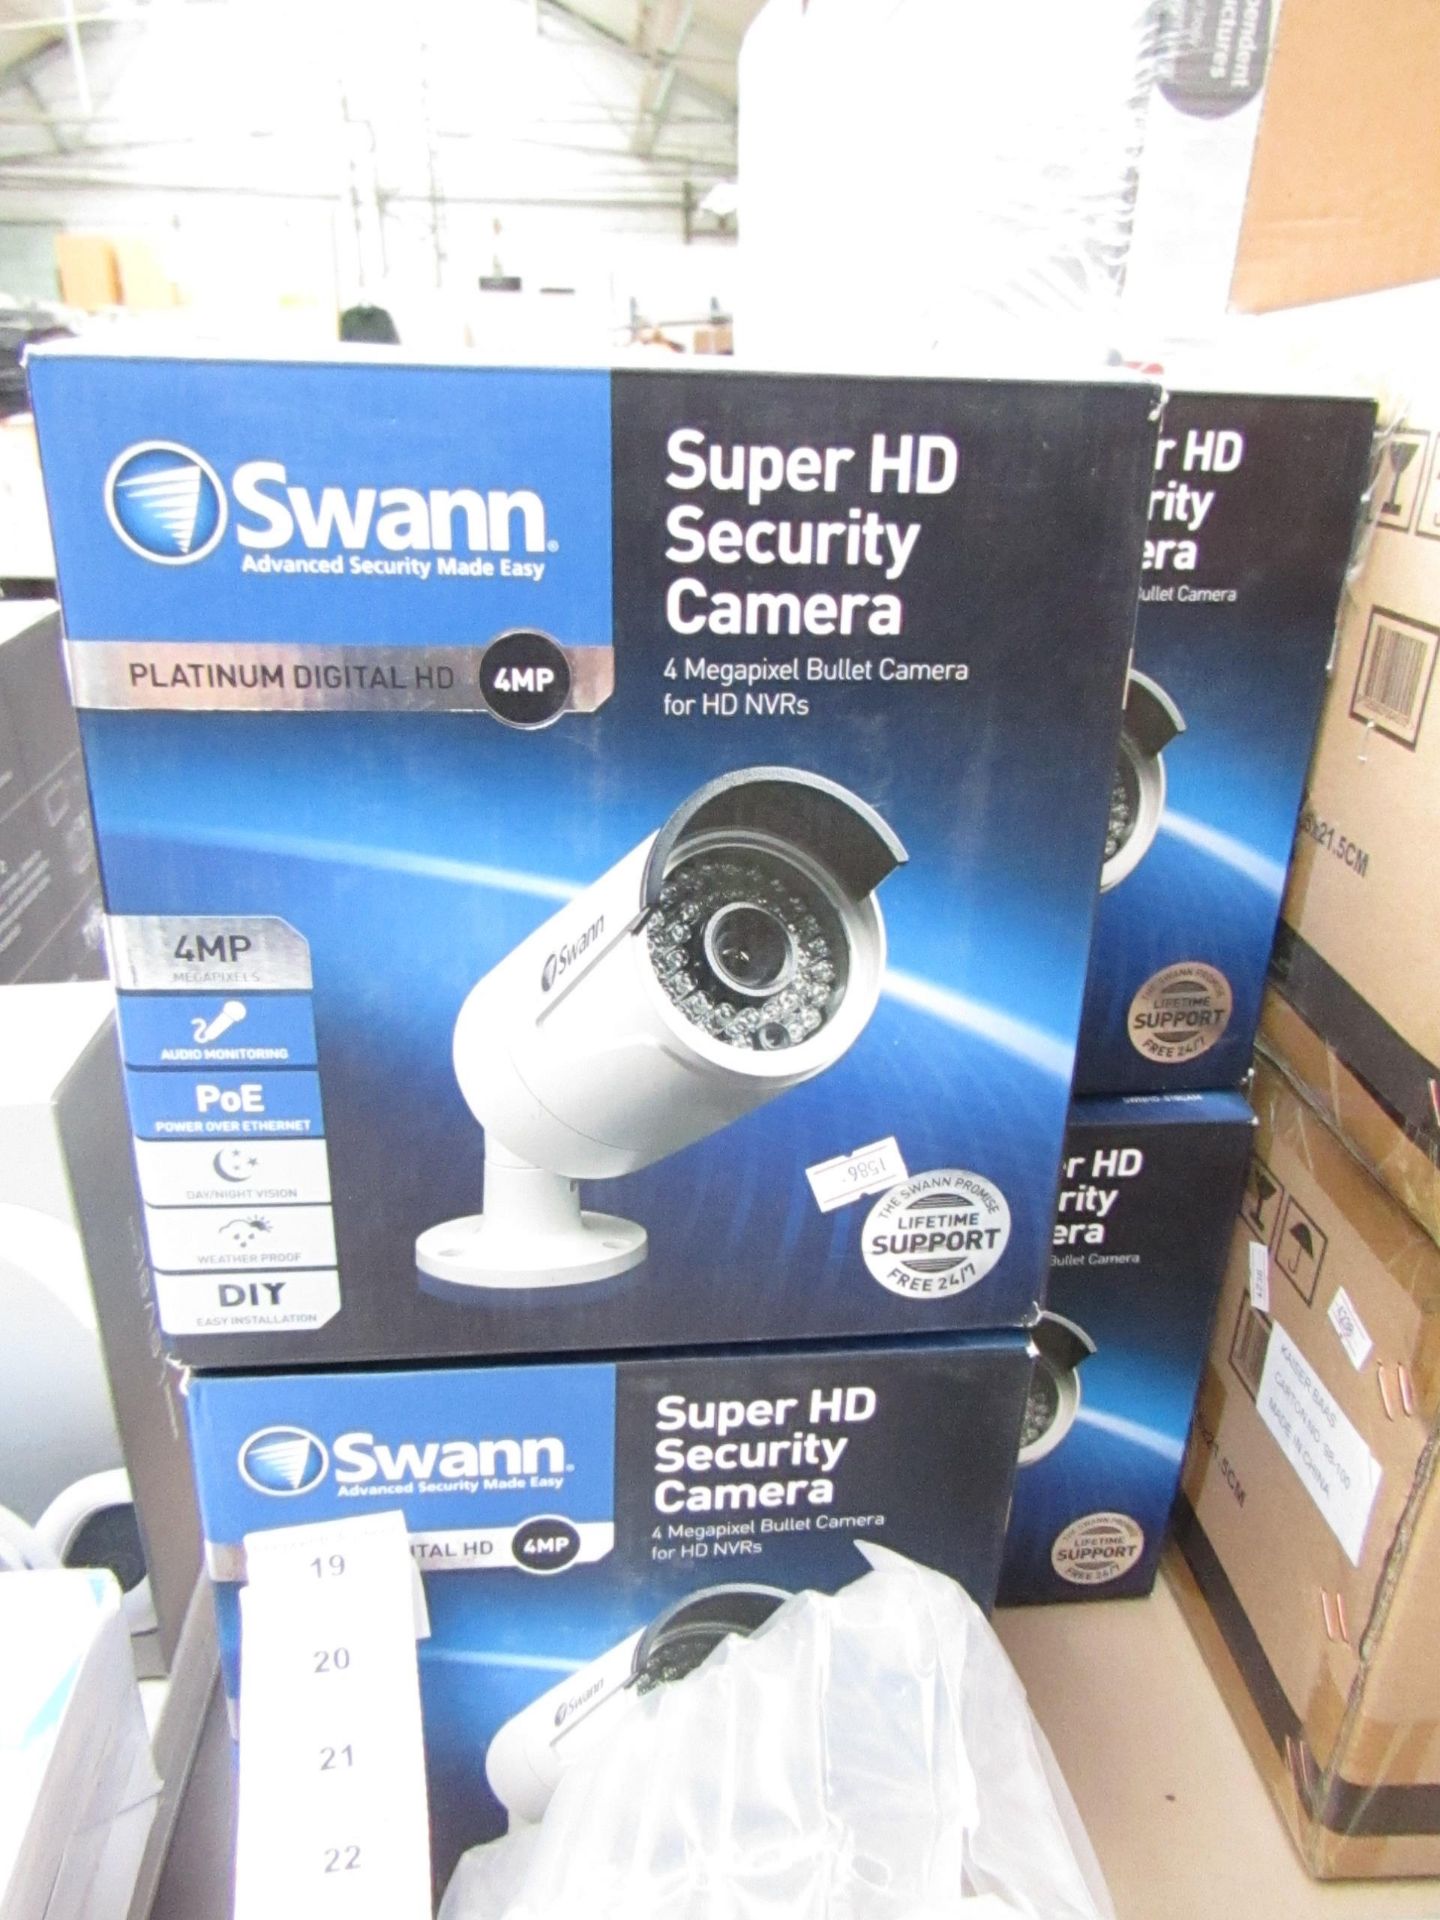 Swann Super HD security camera 4MP bullet camera for HD NVR's, untested, unchecked and boxed.